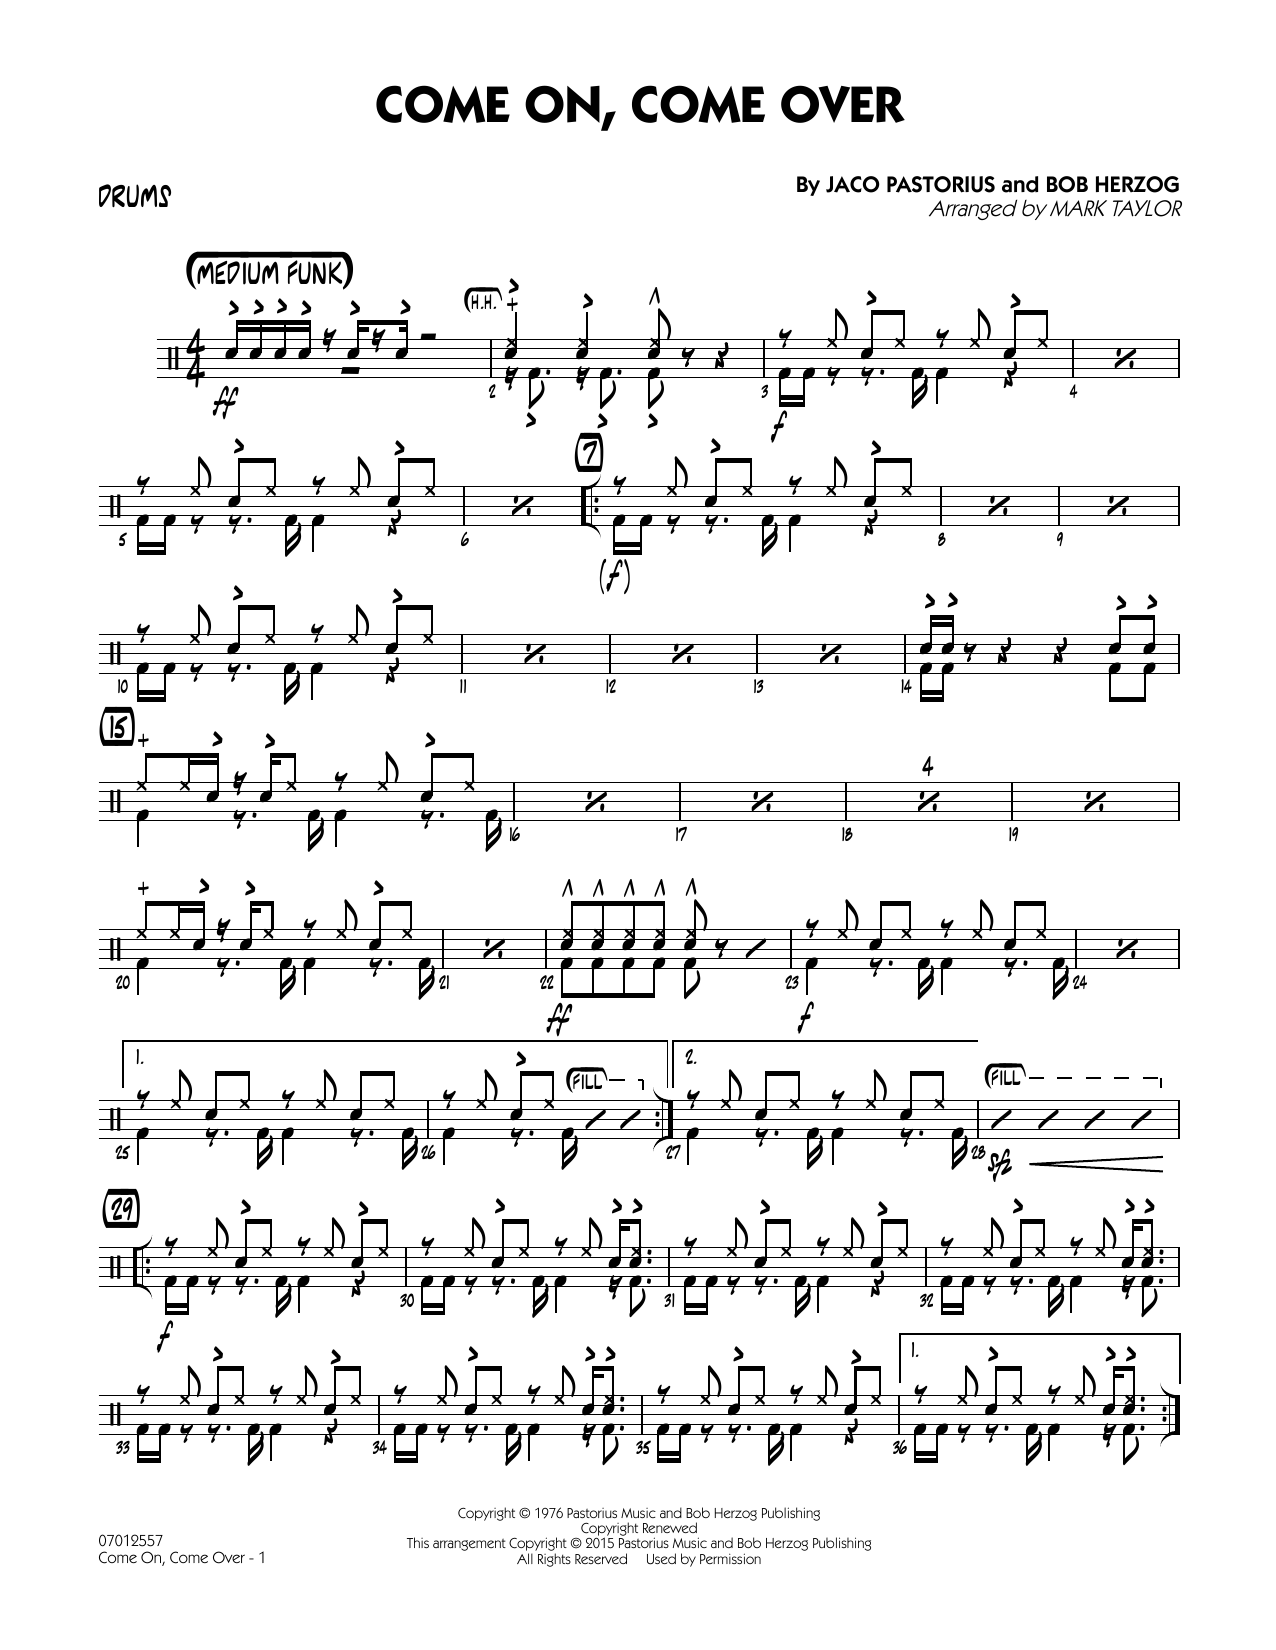 Mark Taylor Come On, Come Over - Drums sheet music notes and chords. Download Printable PDF.